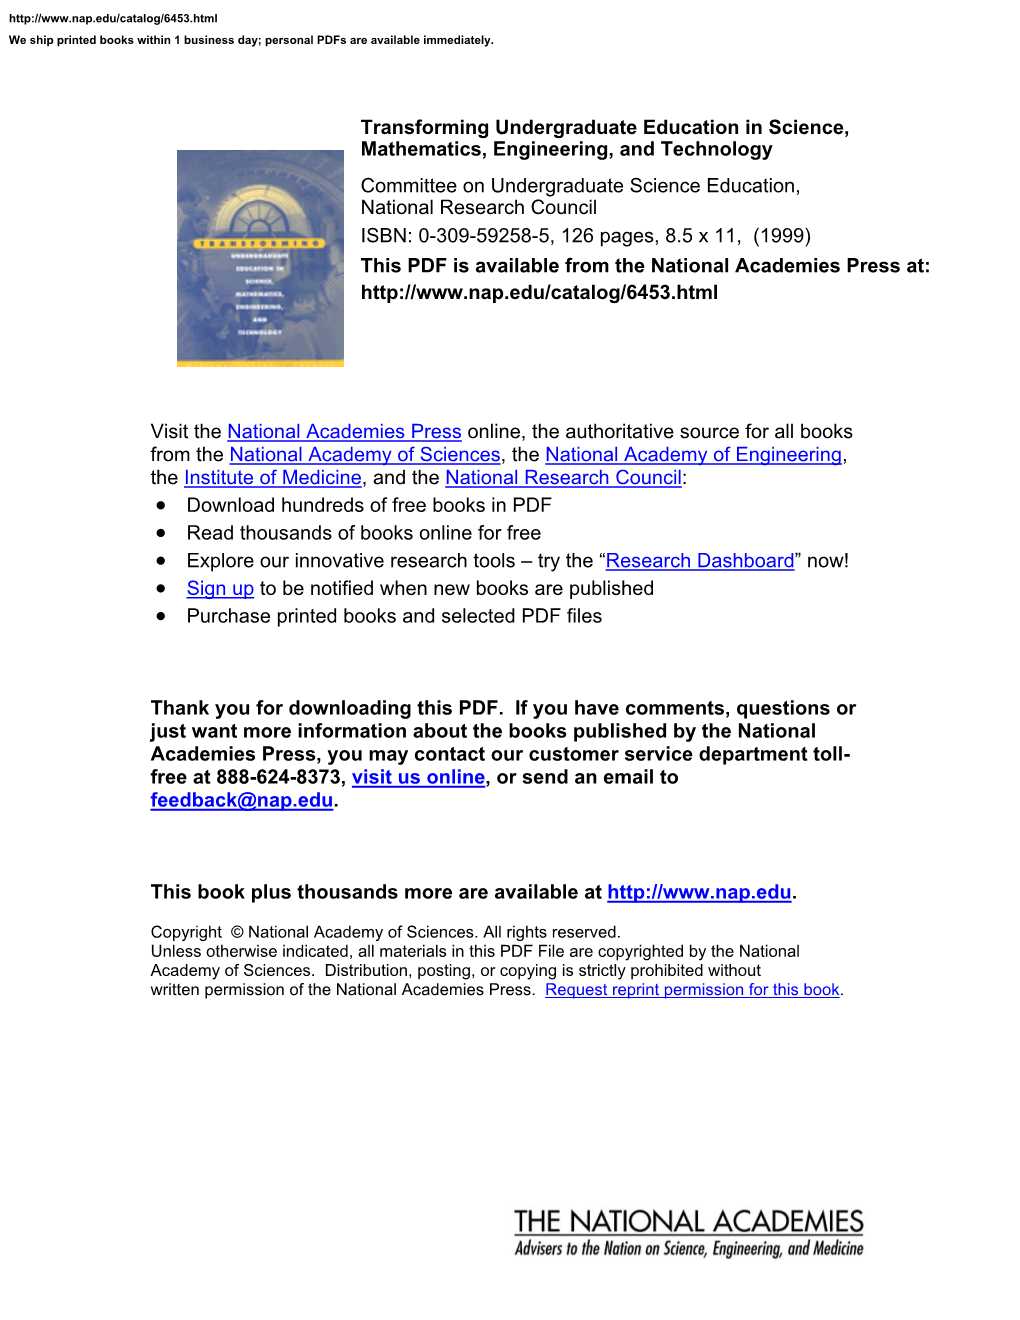 Transforming Undergraduate Education in Science, Mathematics, Engineering, and Technology Committee on Undergraduate Science Education, National Research Council